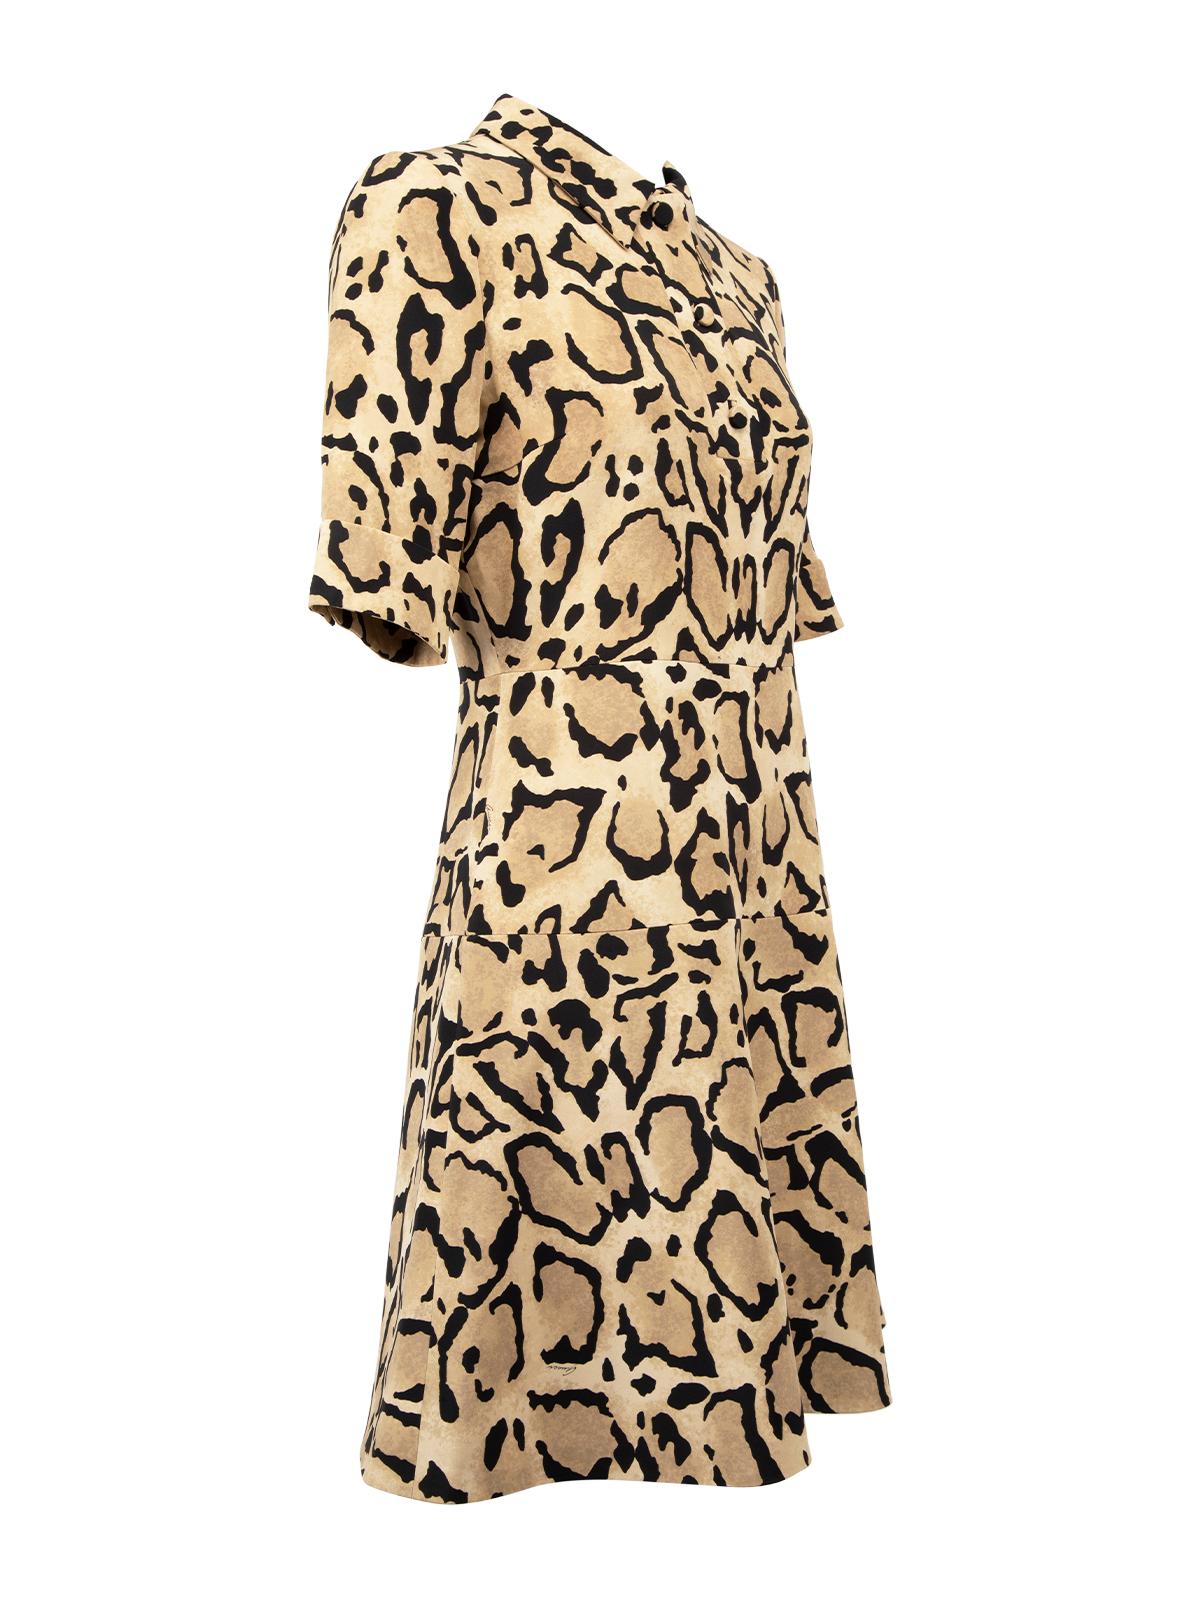 CONDITION is Never Worn. No visible wear to dress is evident on this used Gucci designer resale item. Details Brown Leopard print Silk Silk lining Collared Short sleeves Triple button neck line Fitted A-line skirt Zip and clasp back fastening Made